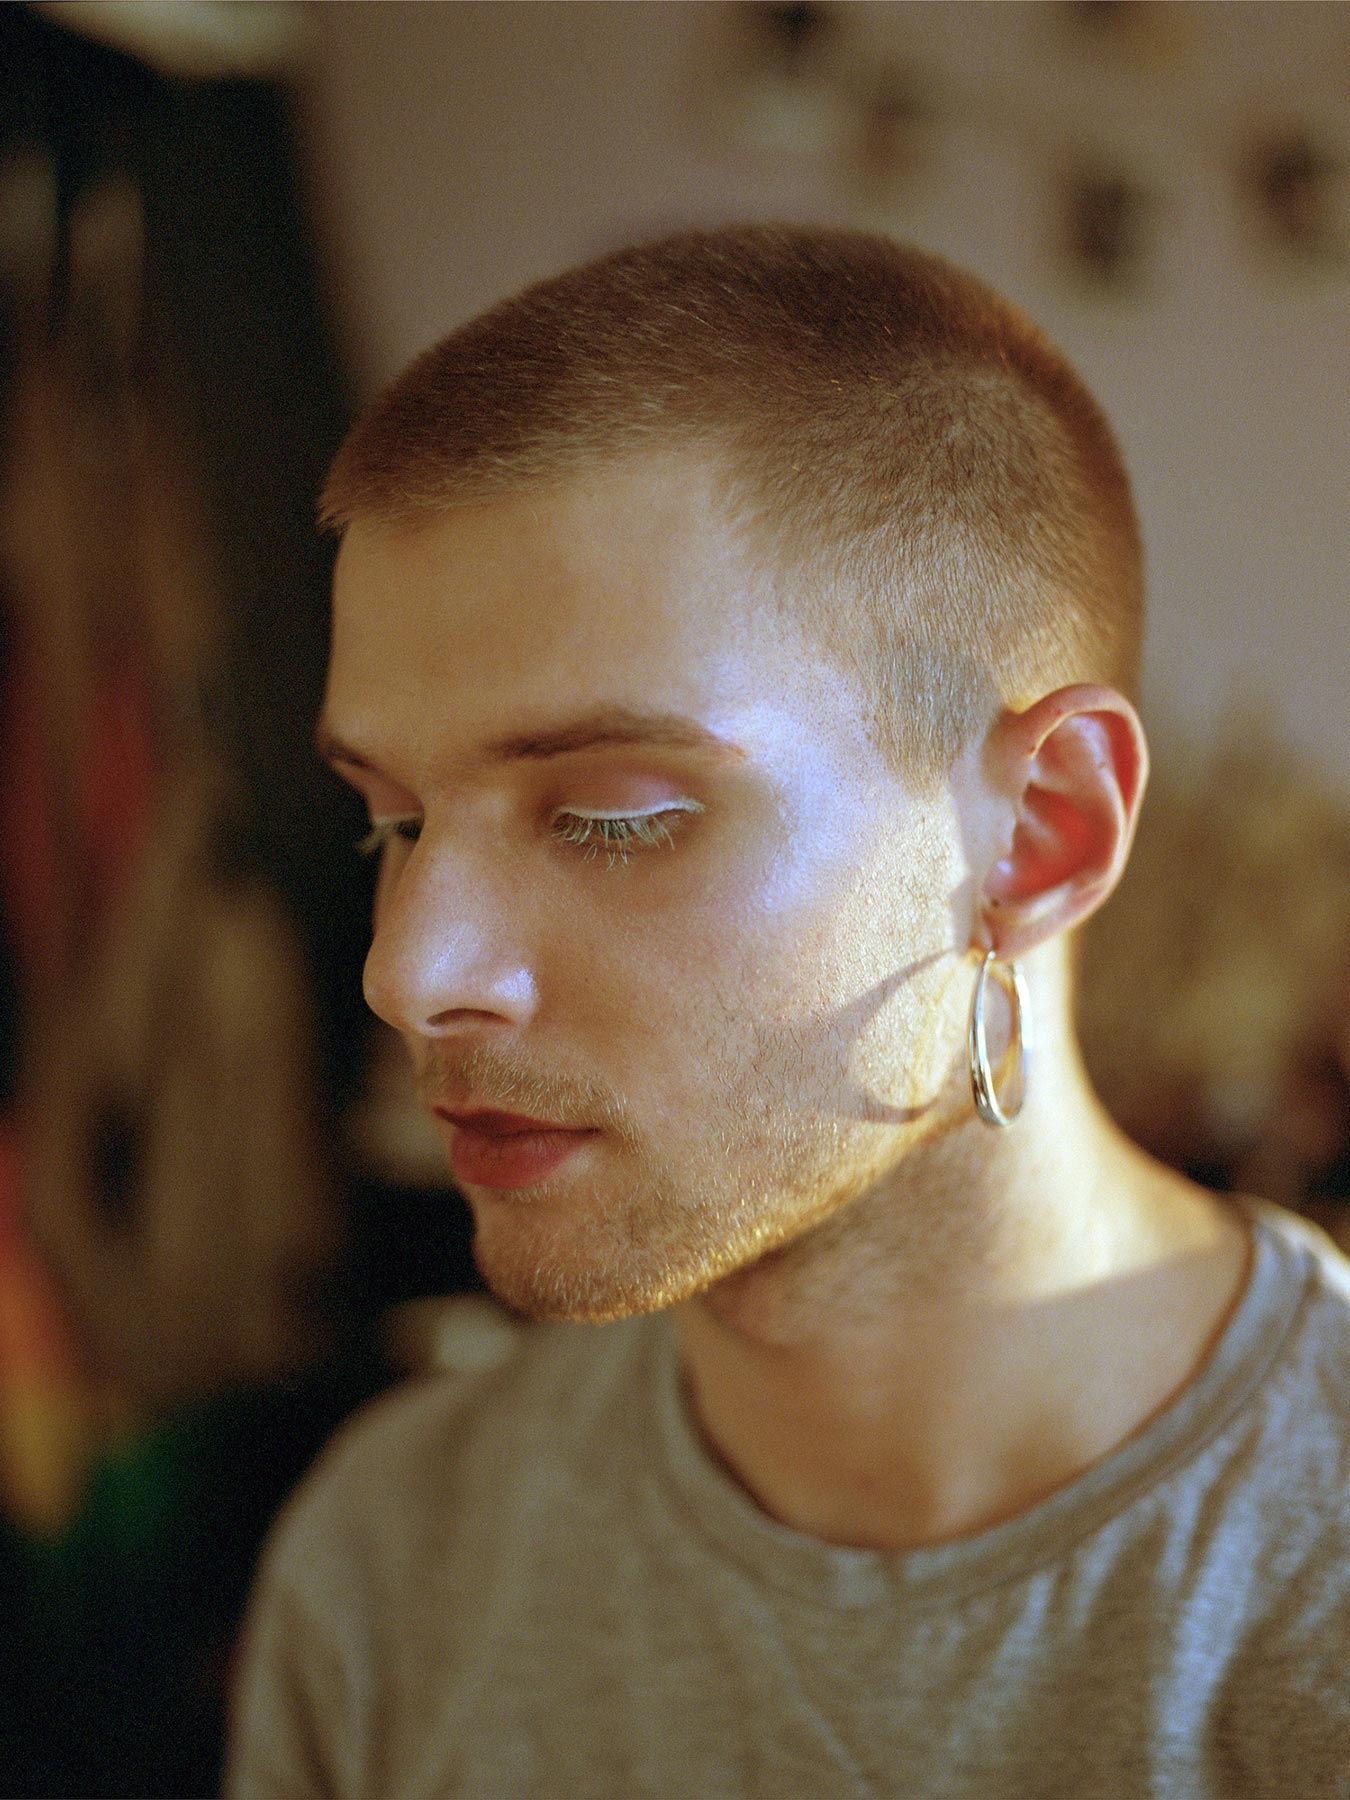 <p>Vidimost.doc is a visual project dedicated to increasing the representation of Russia’s LGBTQ+ youth. This portrait of Nikita shot by Kirill Voynov was the very first feature of the project in 2018 – and still manifests the radical power of softness and self determination.</p>